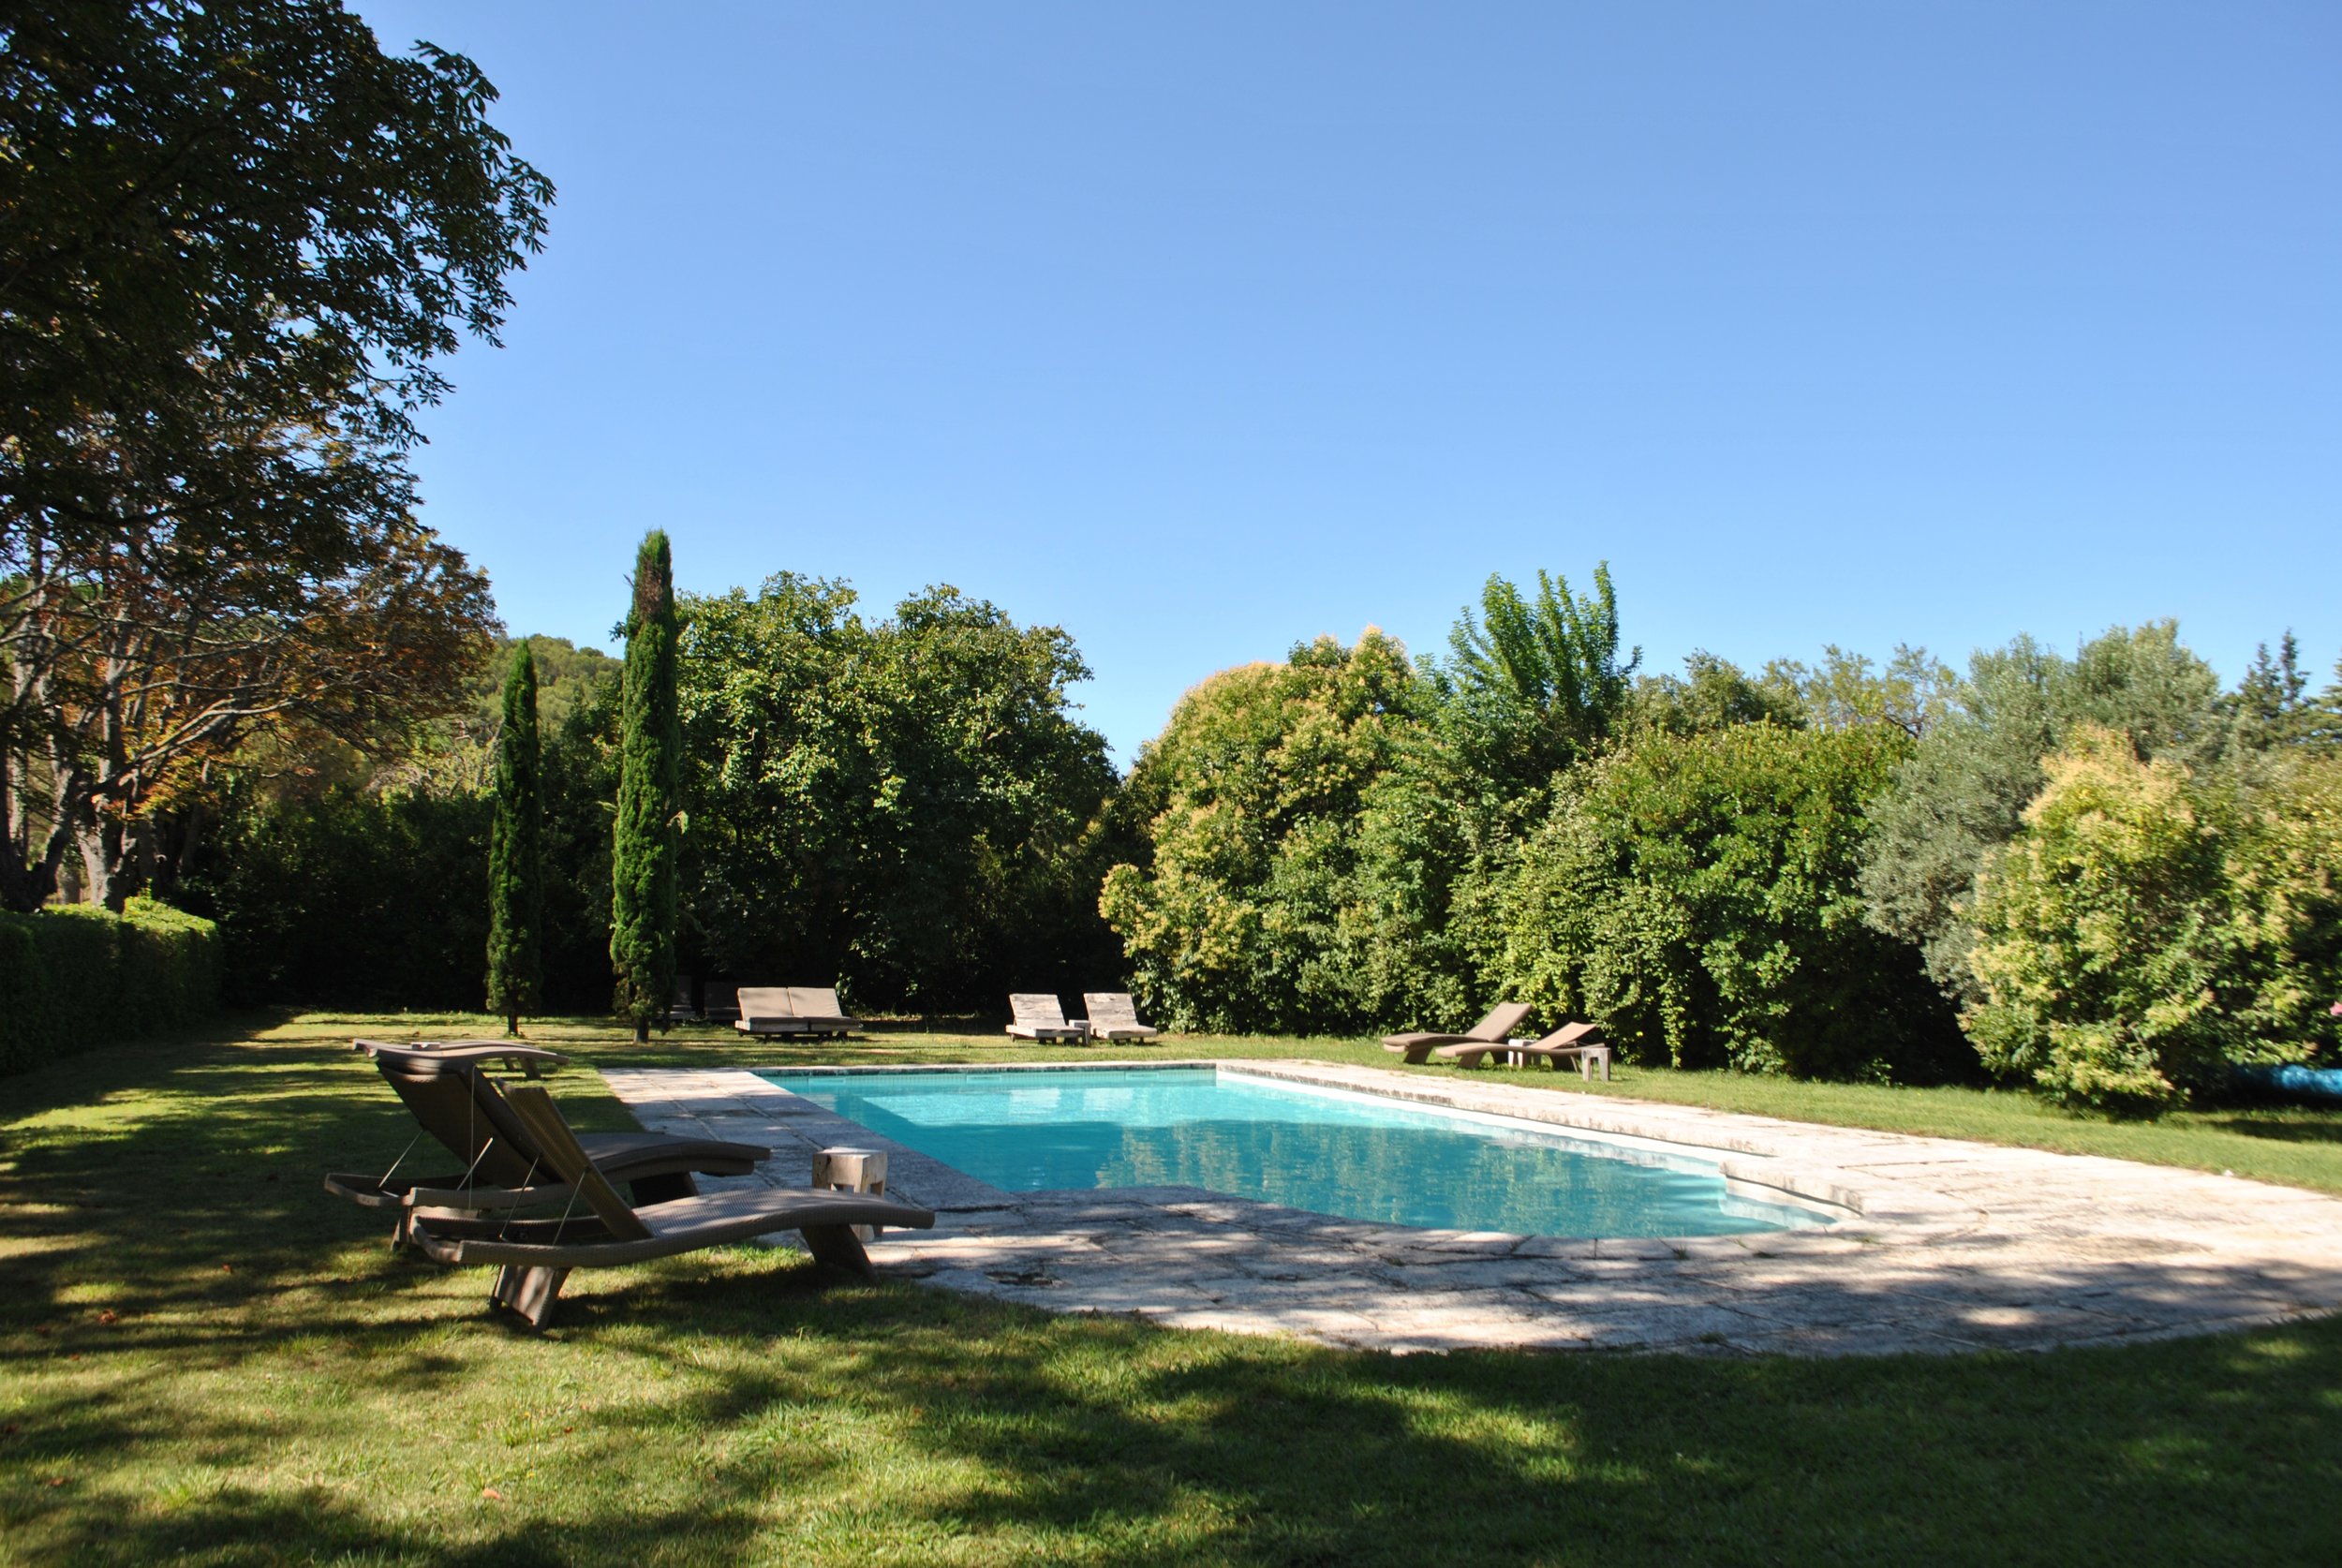 Francis York 19th Century Country Manor For Sale Near Aix-en-Provence 6.JPG